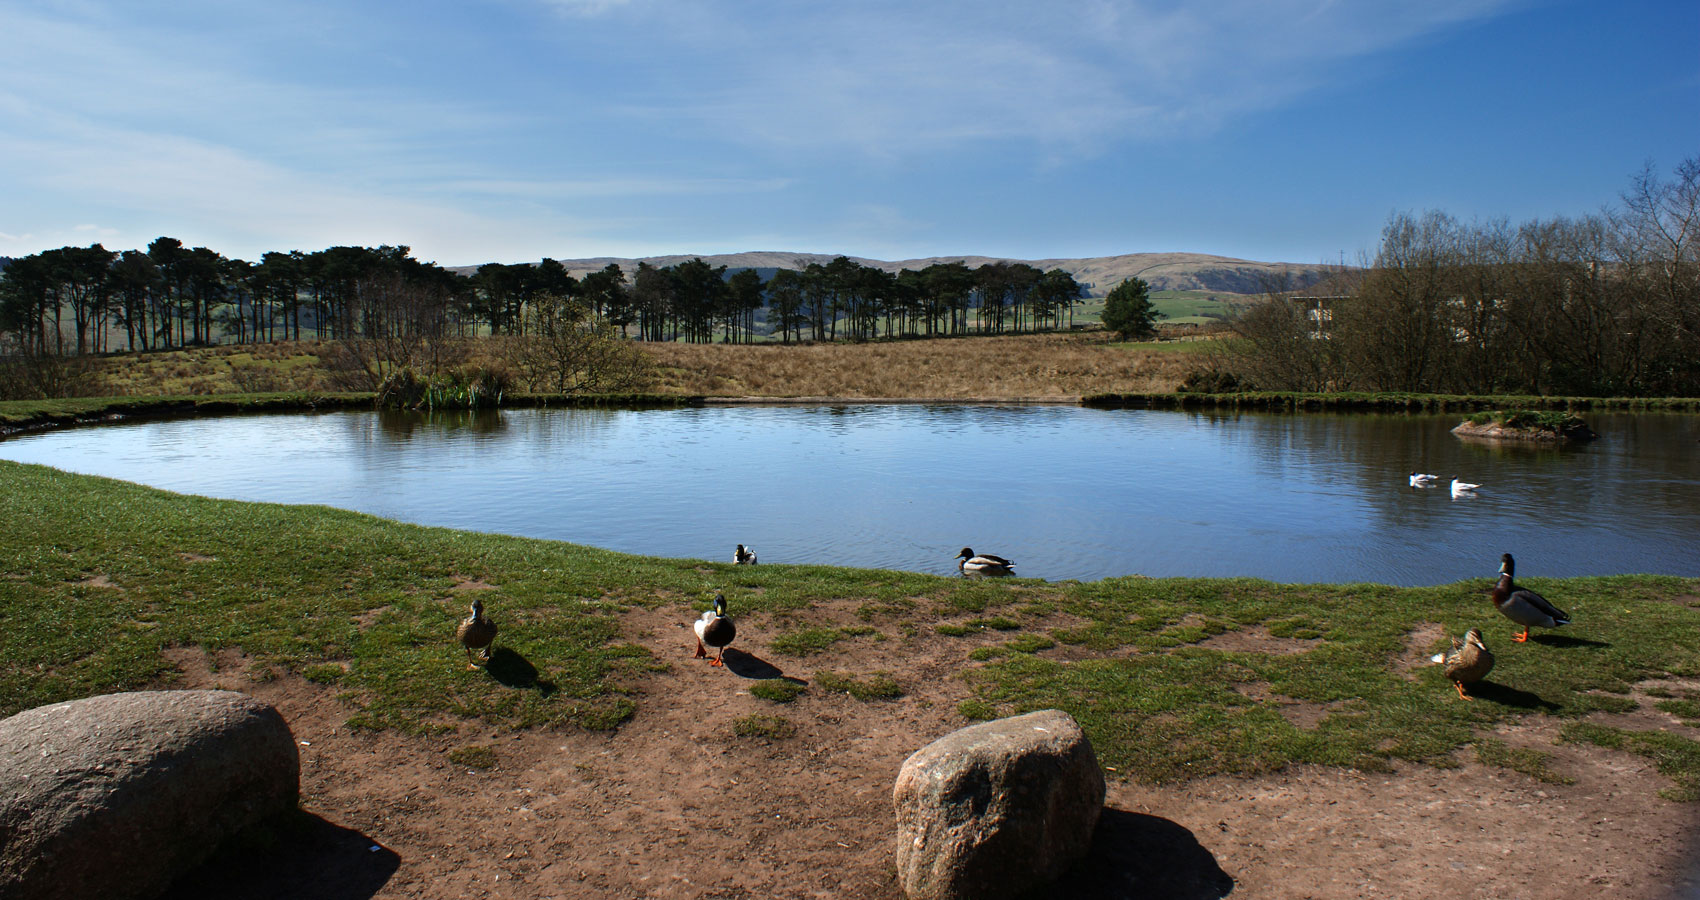 Tebay Services Southbound by Matthew Roy Davey at Spillwords.com